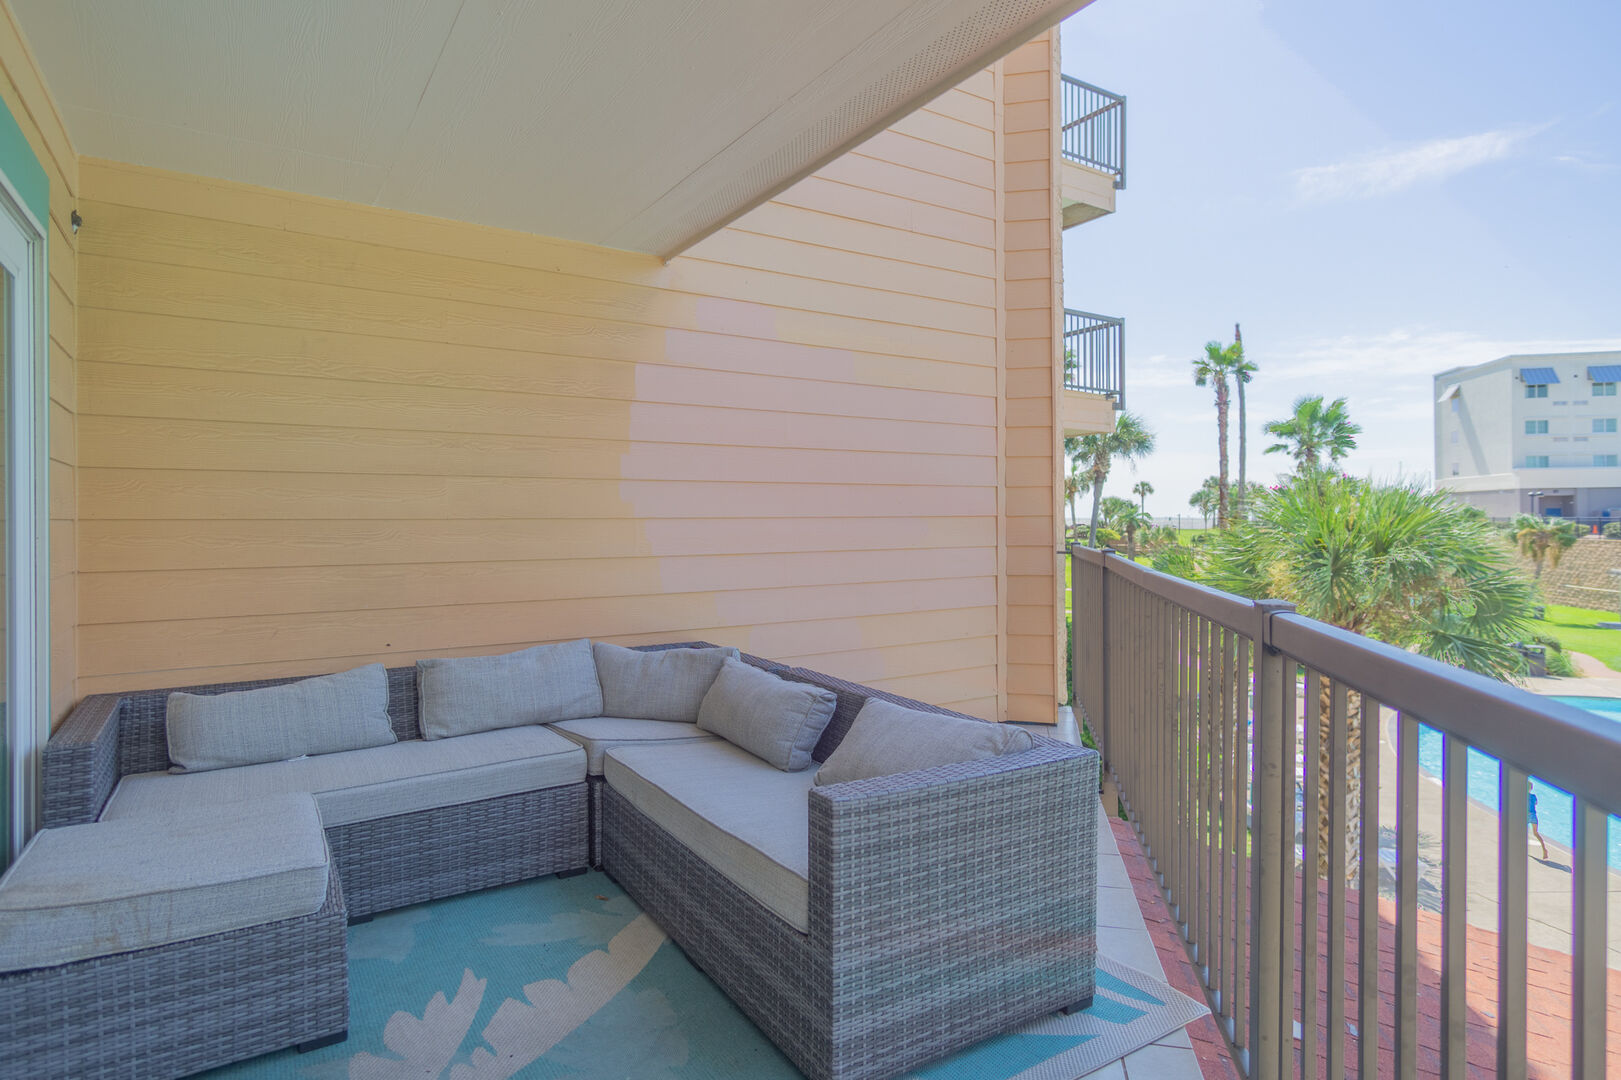 The first floor balconies offer a little more space than the 2nd and 3rd floors.  This is a great place to sit and listen to the summer pool sounds during the day, or the waves rolling in at night.